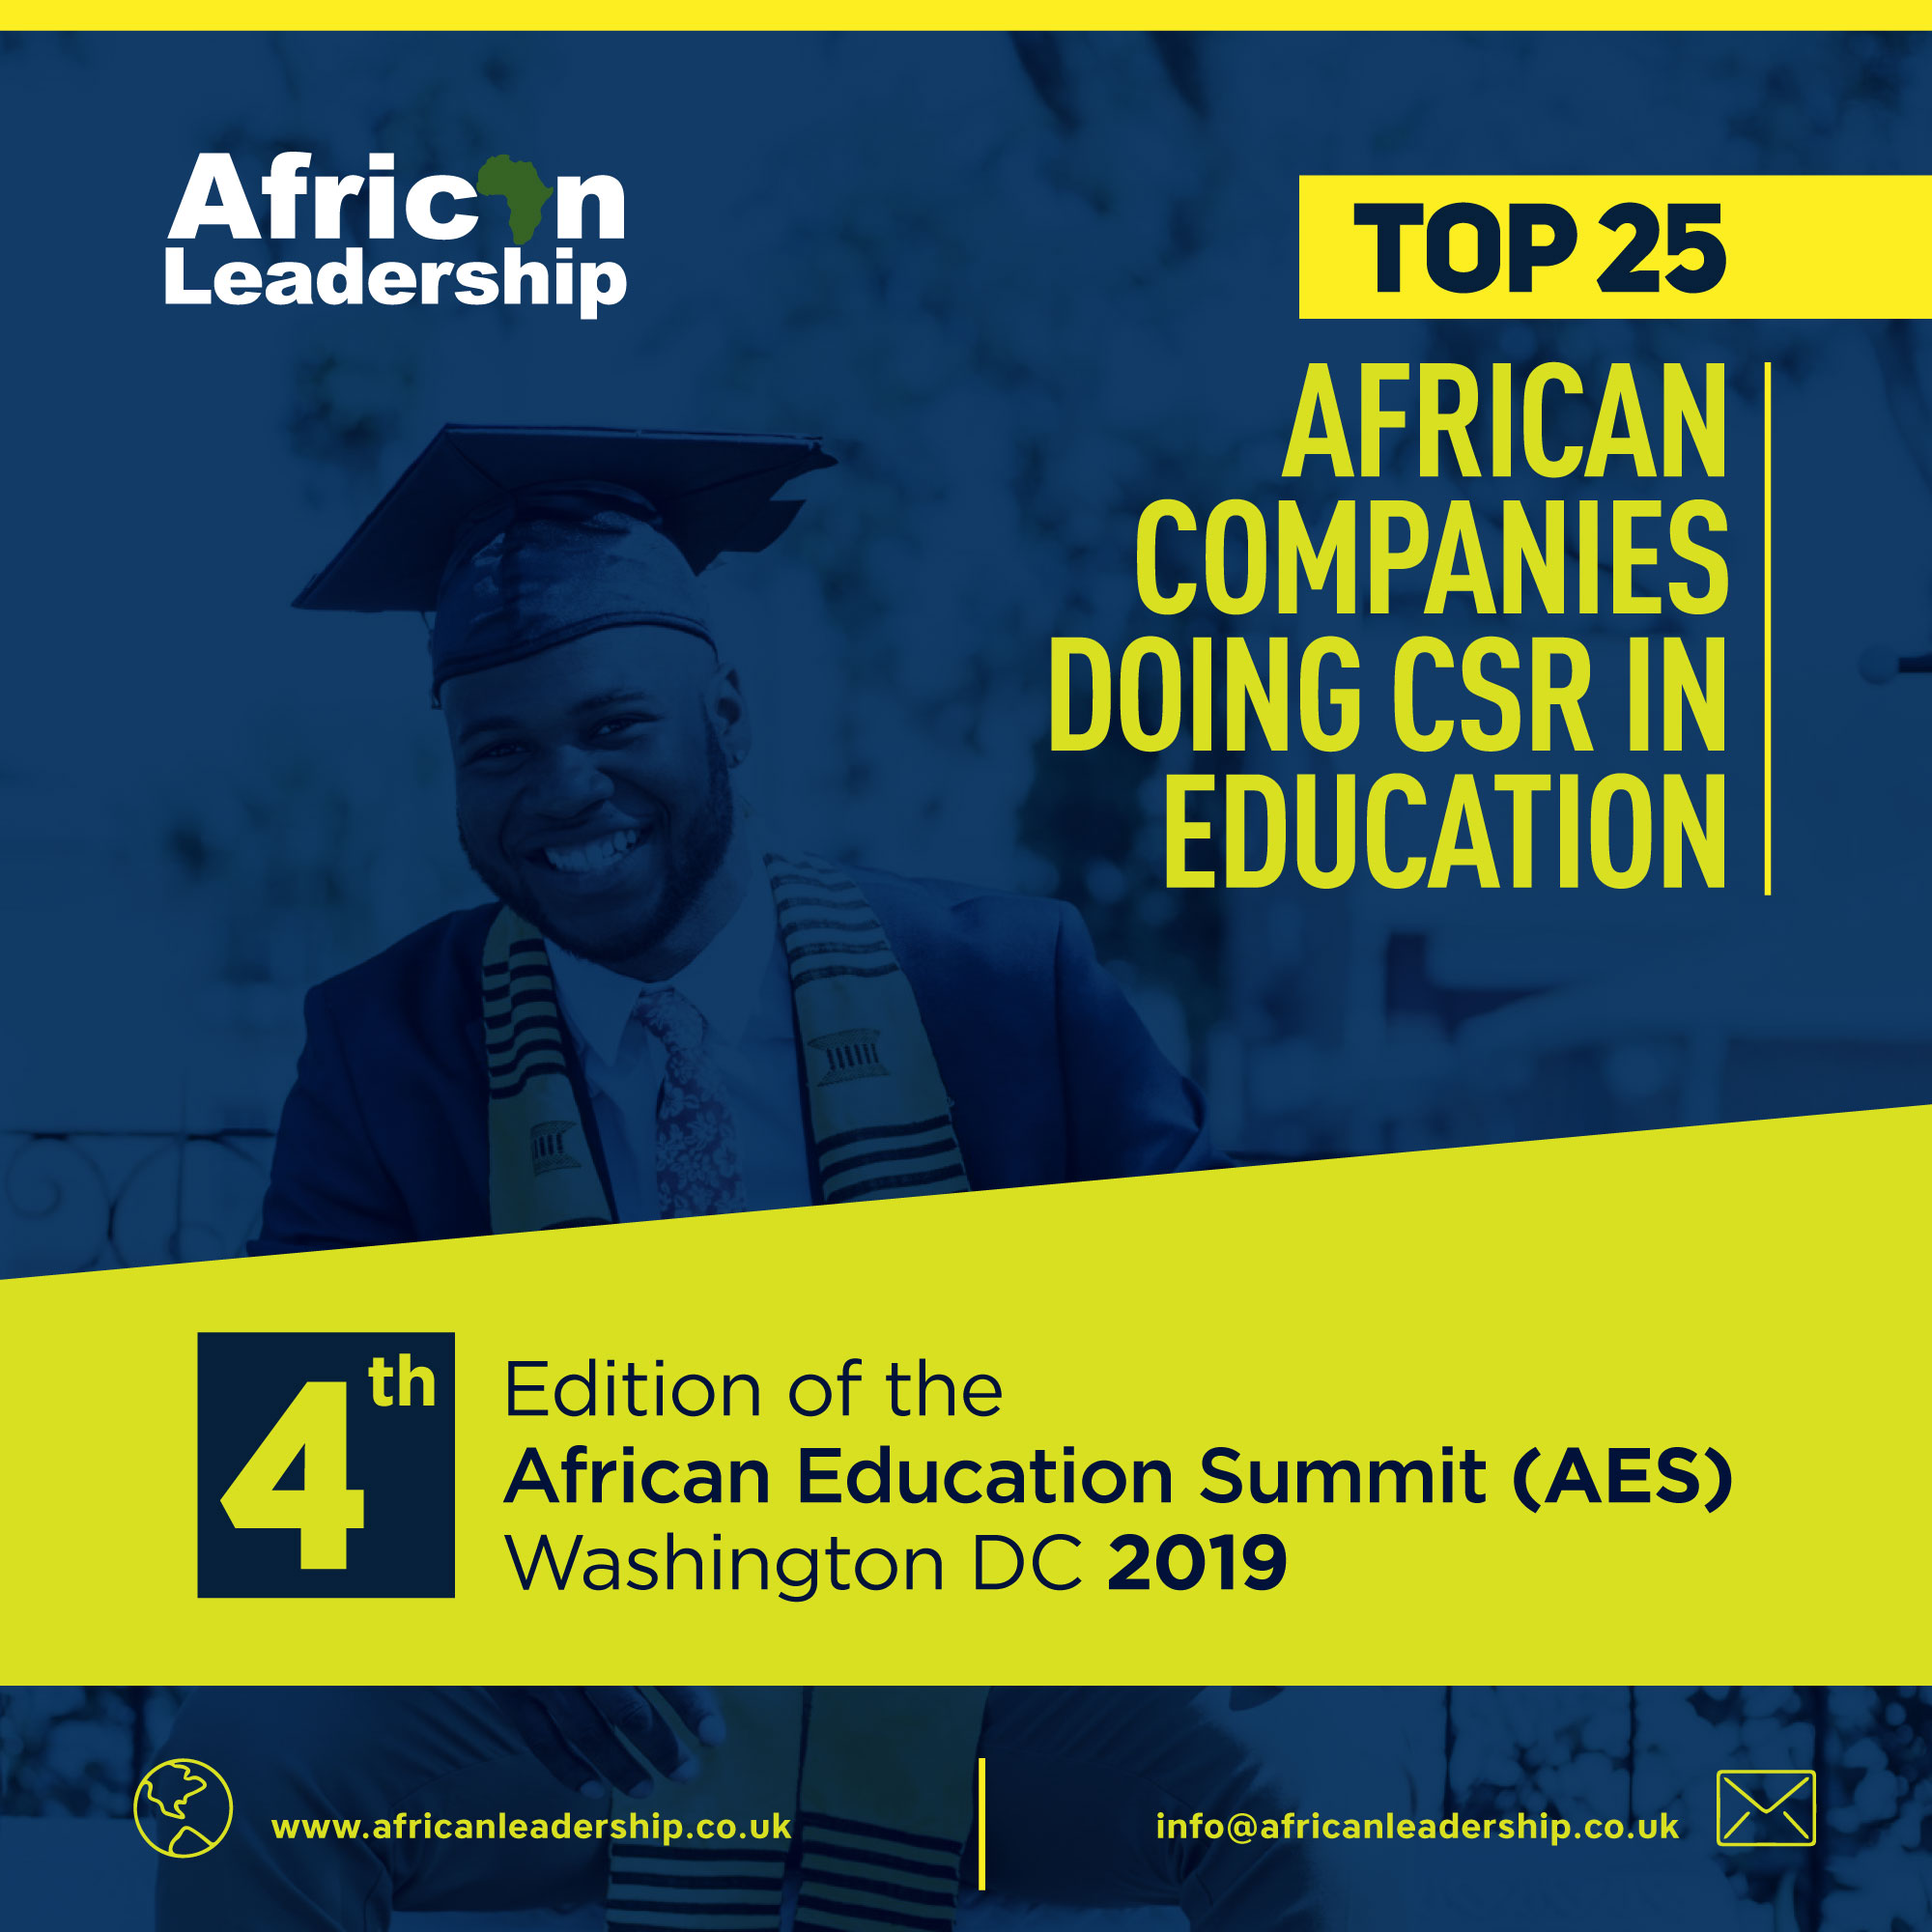 AFRICAN LEADERSHIP MAGAZINE TO PRESENT THE TOP 25 COMPANIES IN AFRICA SUPPORTING EDUCATION 